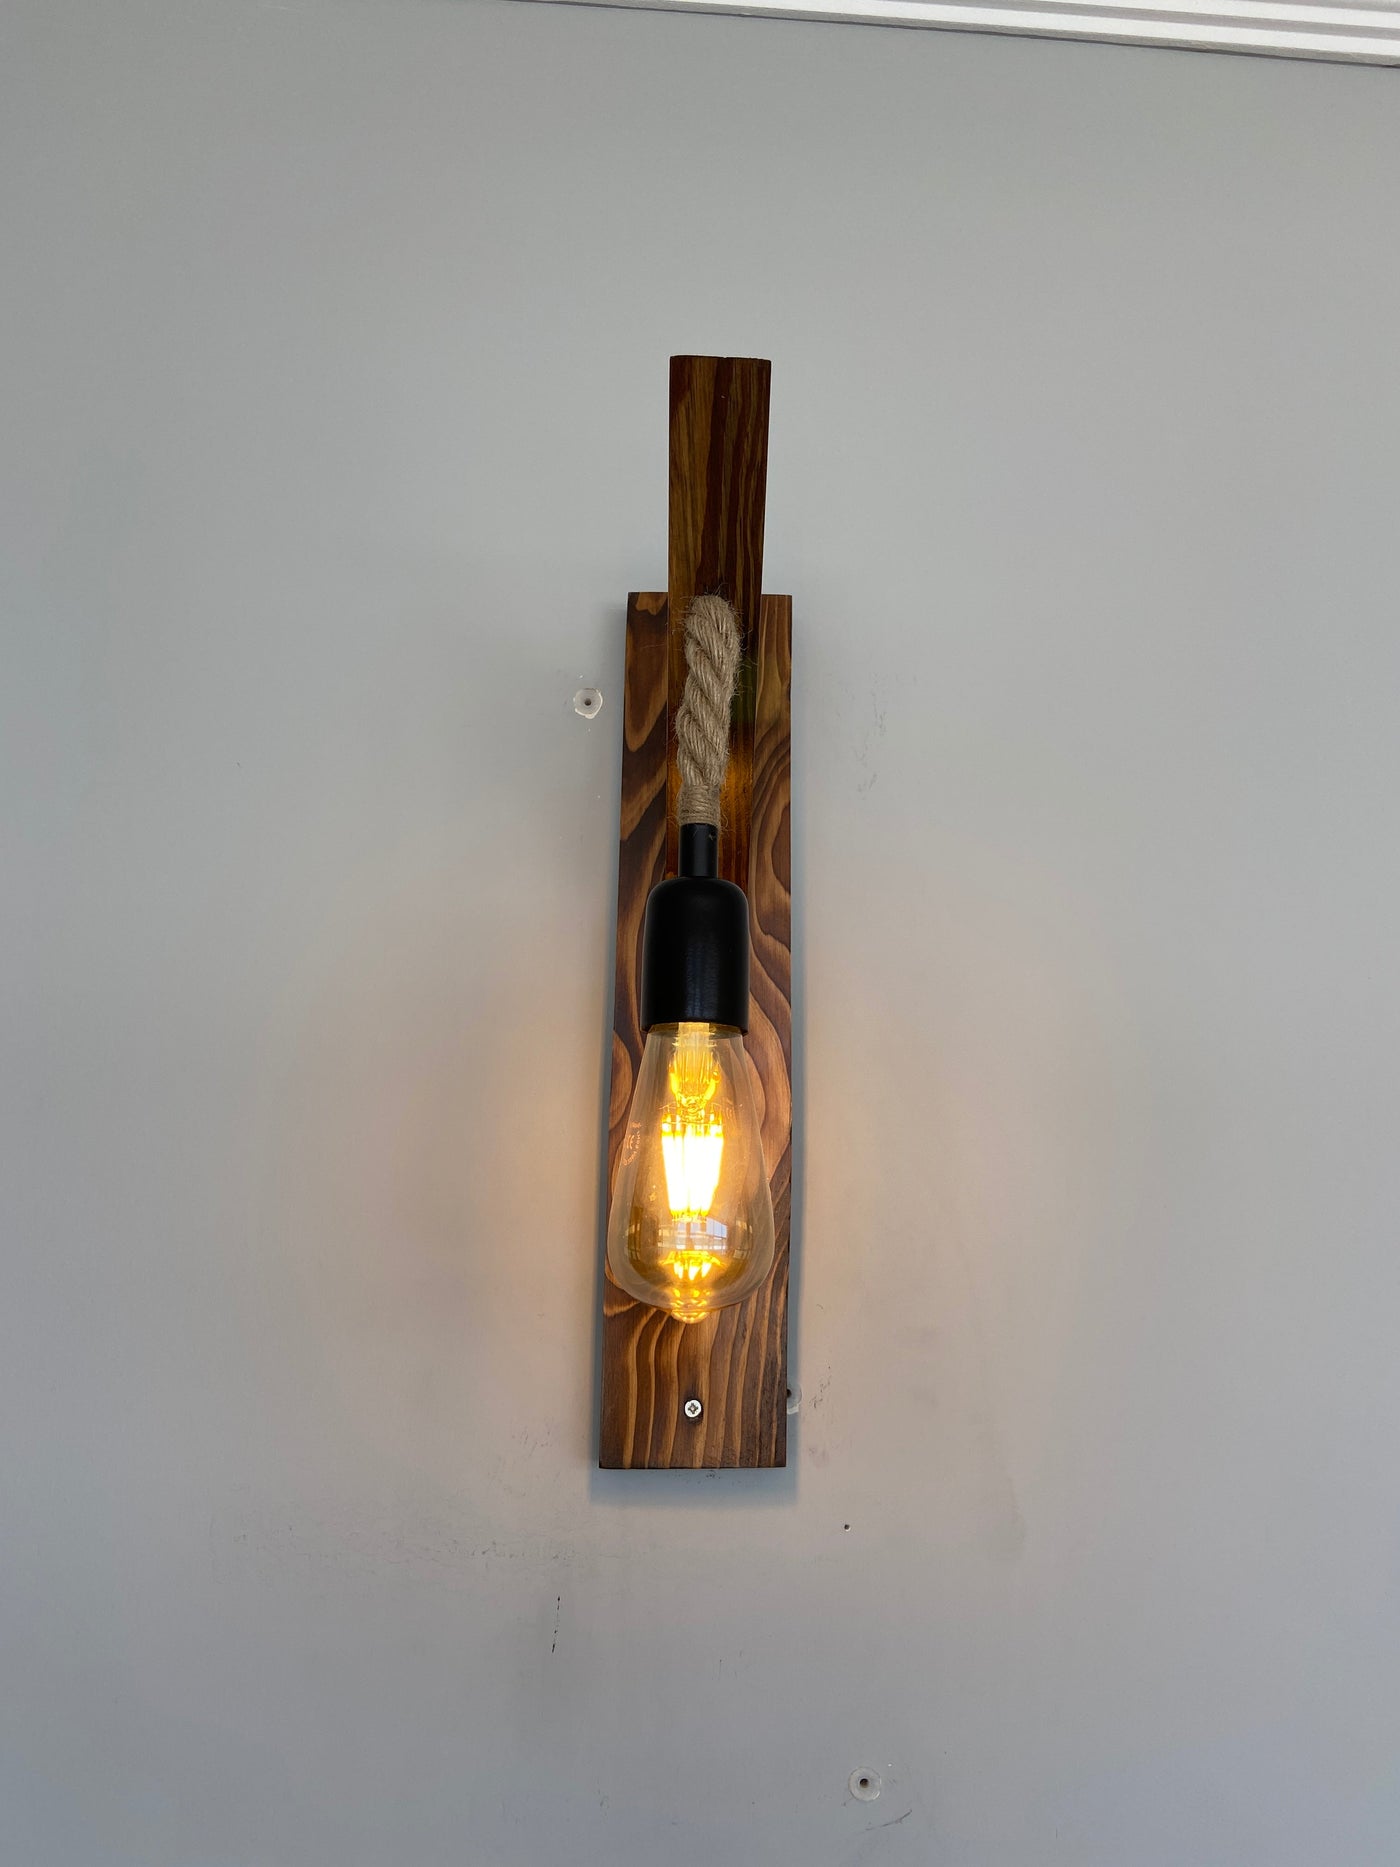 HT102 - Industrial Wooden Wall Lamp, Vintage- Retro, Wood & Rope